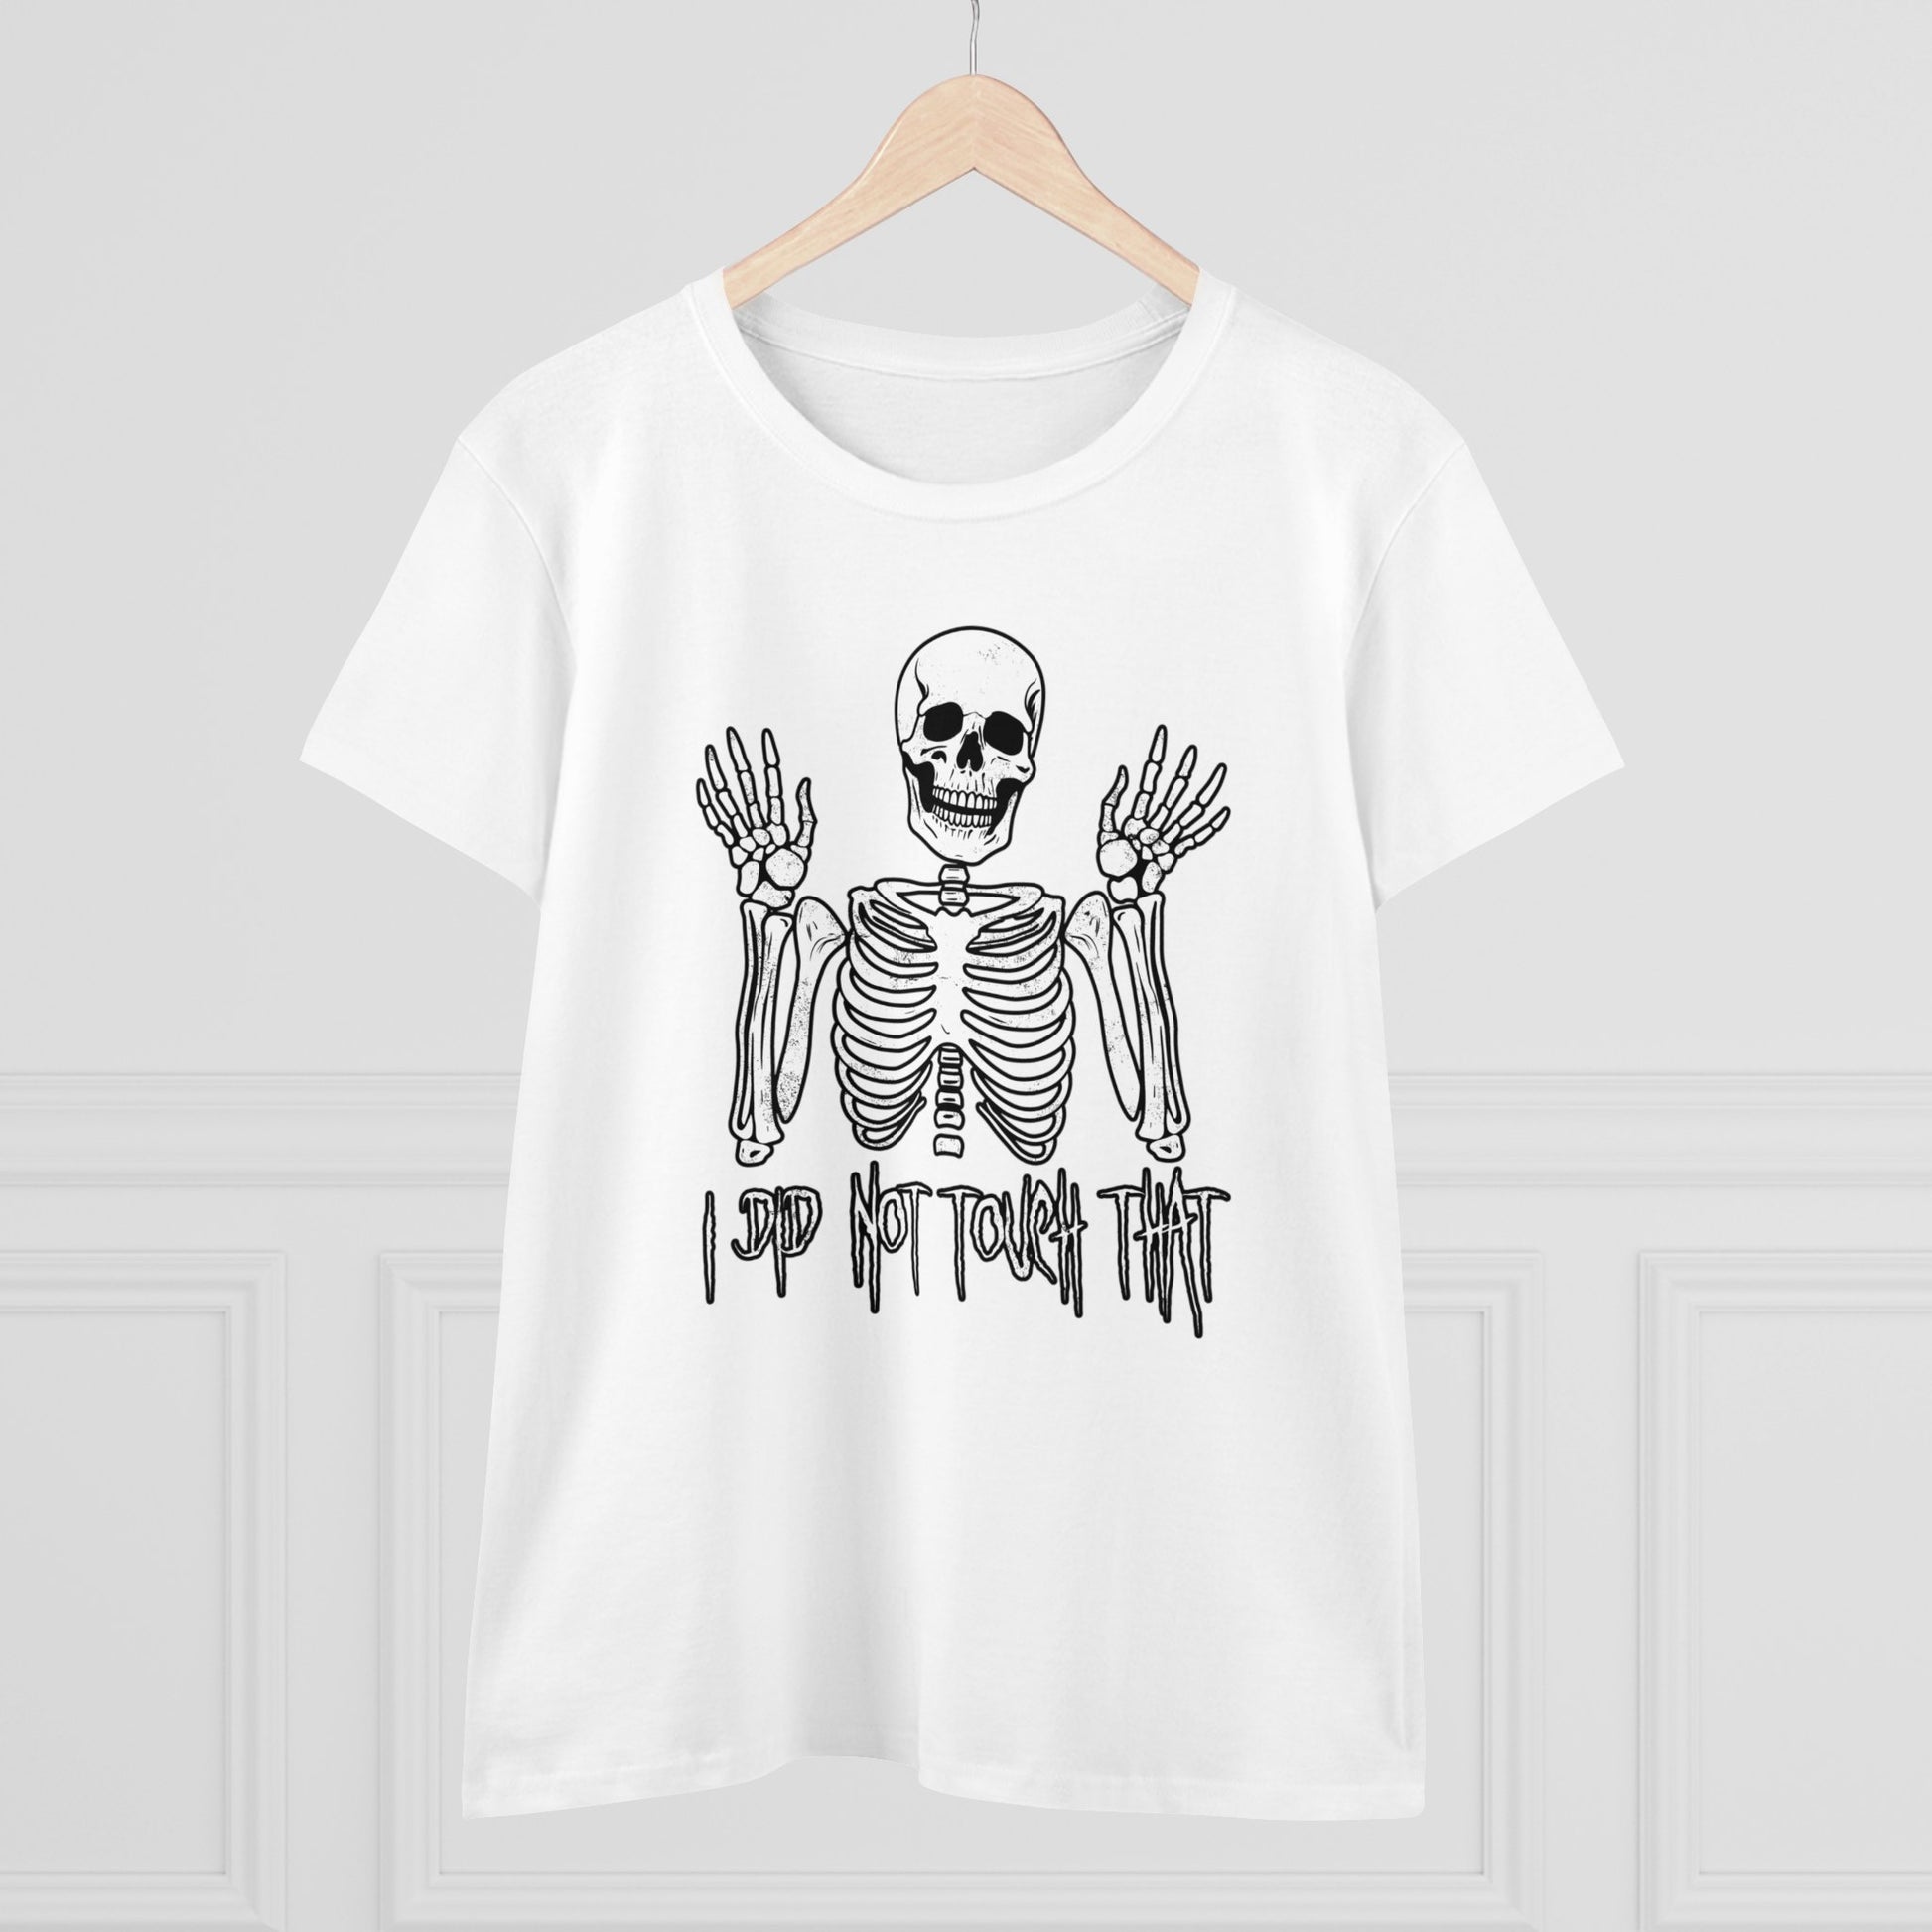 Women's T-shirt Skelly Did Not Touch That - Frogos Design